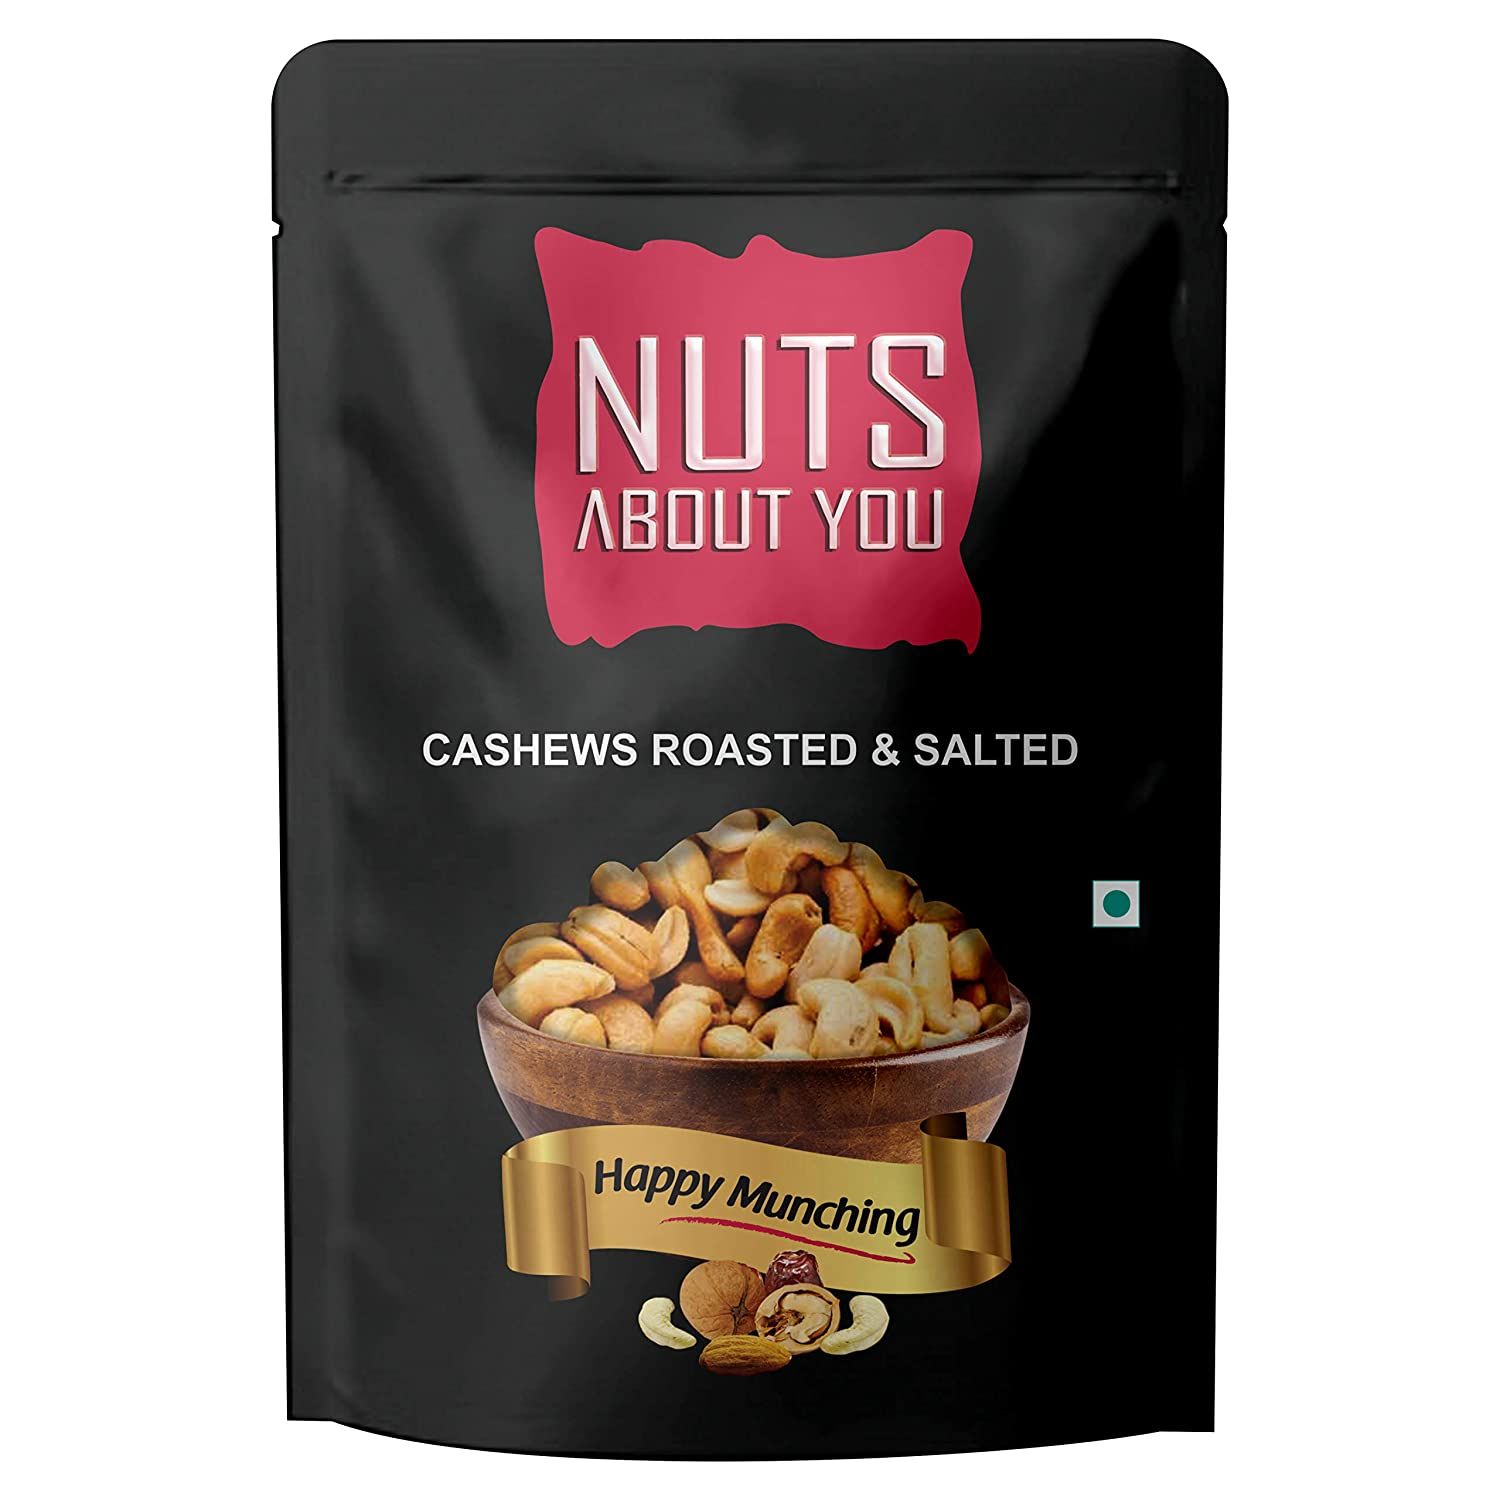 Nuts About You Roasted & Salted Cashews Image